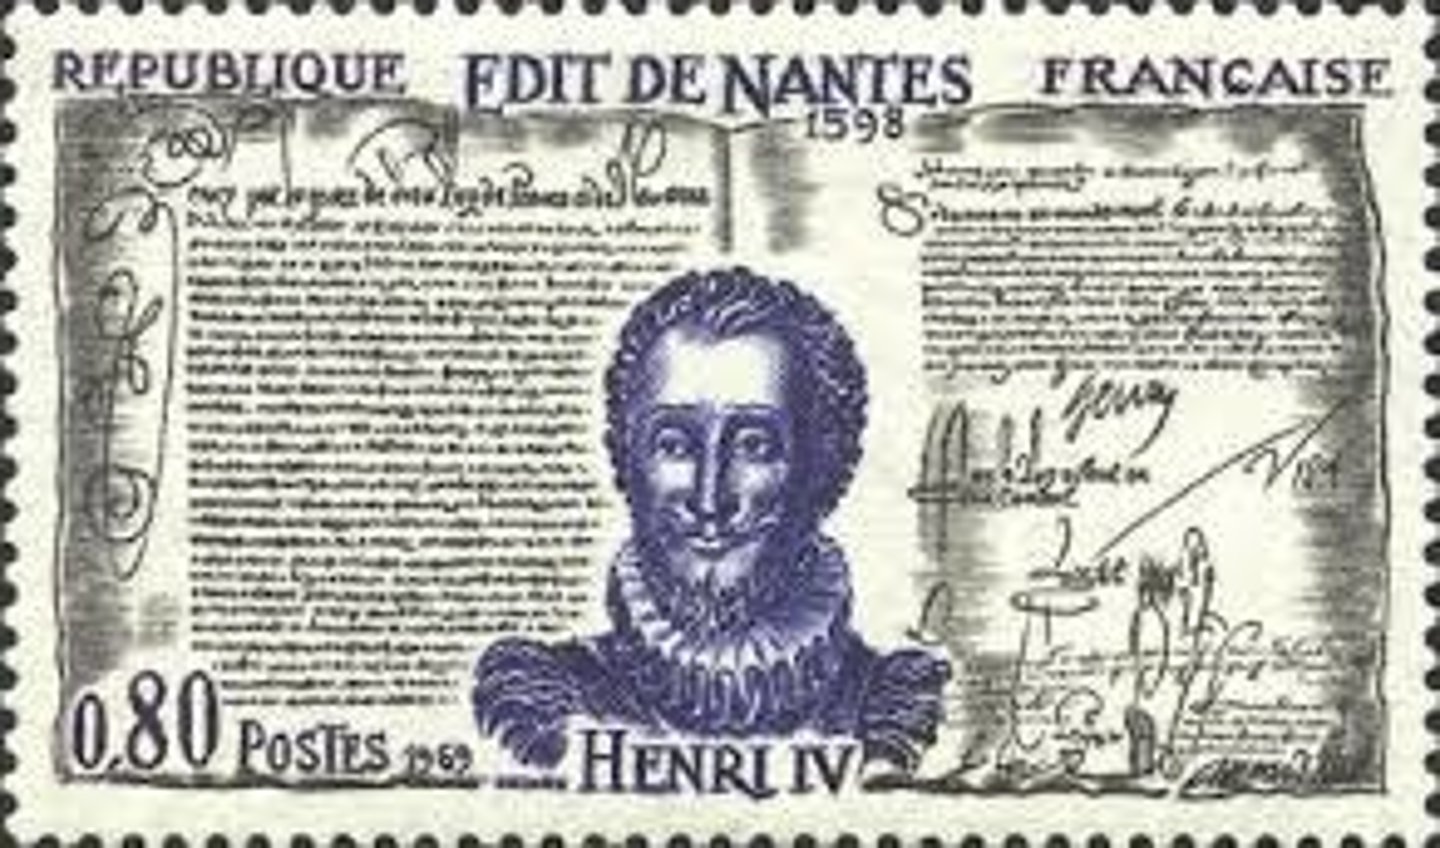 <p>- France (1598)<br>- Issued By Henry IV<br>- Ended The French Religious Wars<br>- Recognized Catholicism As Official Religion of France<br>- Gave Protection &amp; Some Freedom of Worship to French Huguenots (French Calvinists) <br>- Huguenots could worship freely in their own walled cities. Issued in hopes of ending religious conflict in France.</p>